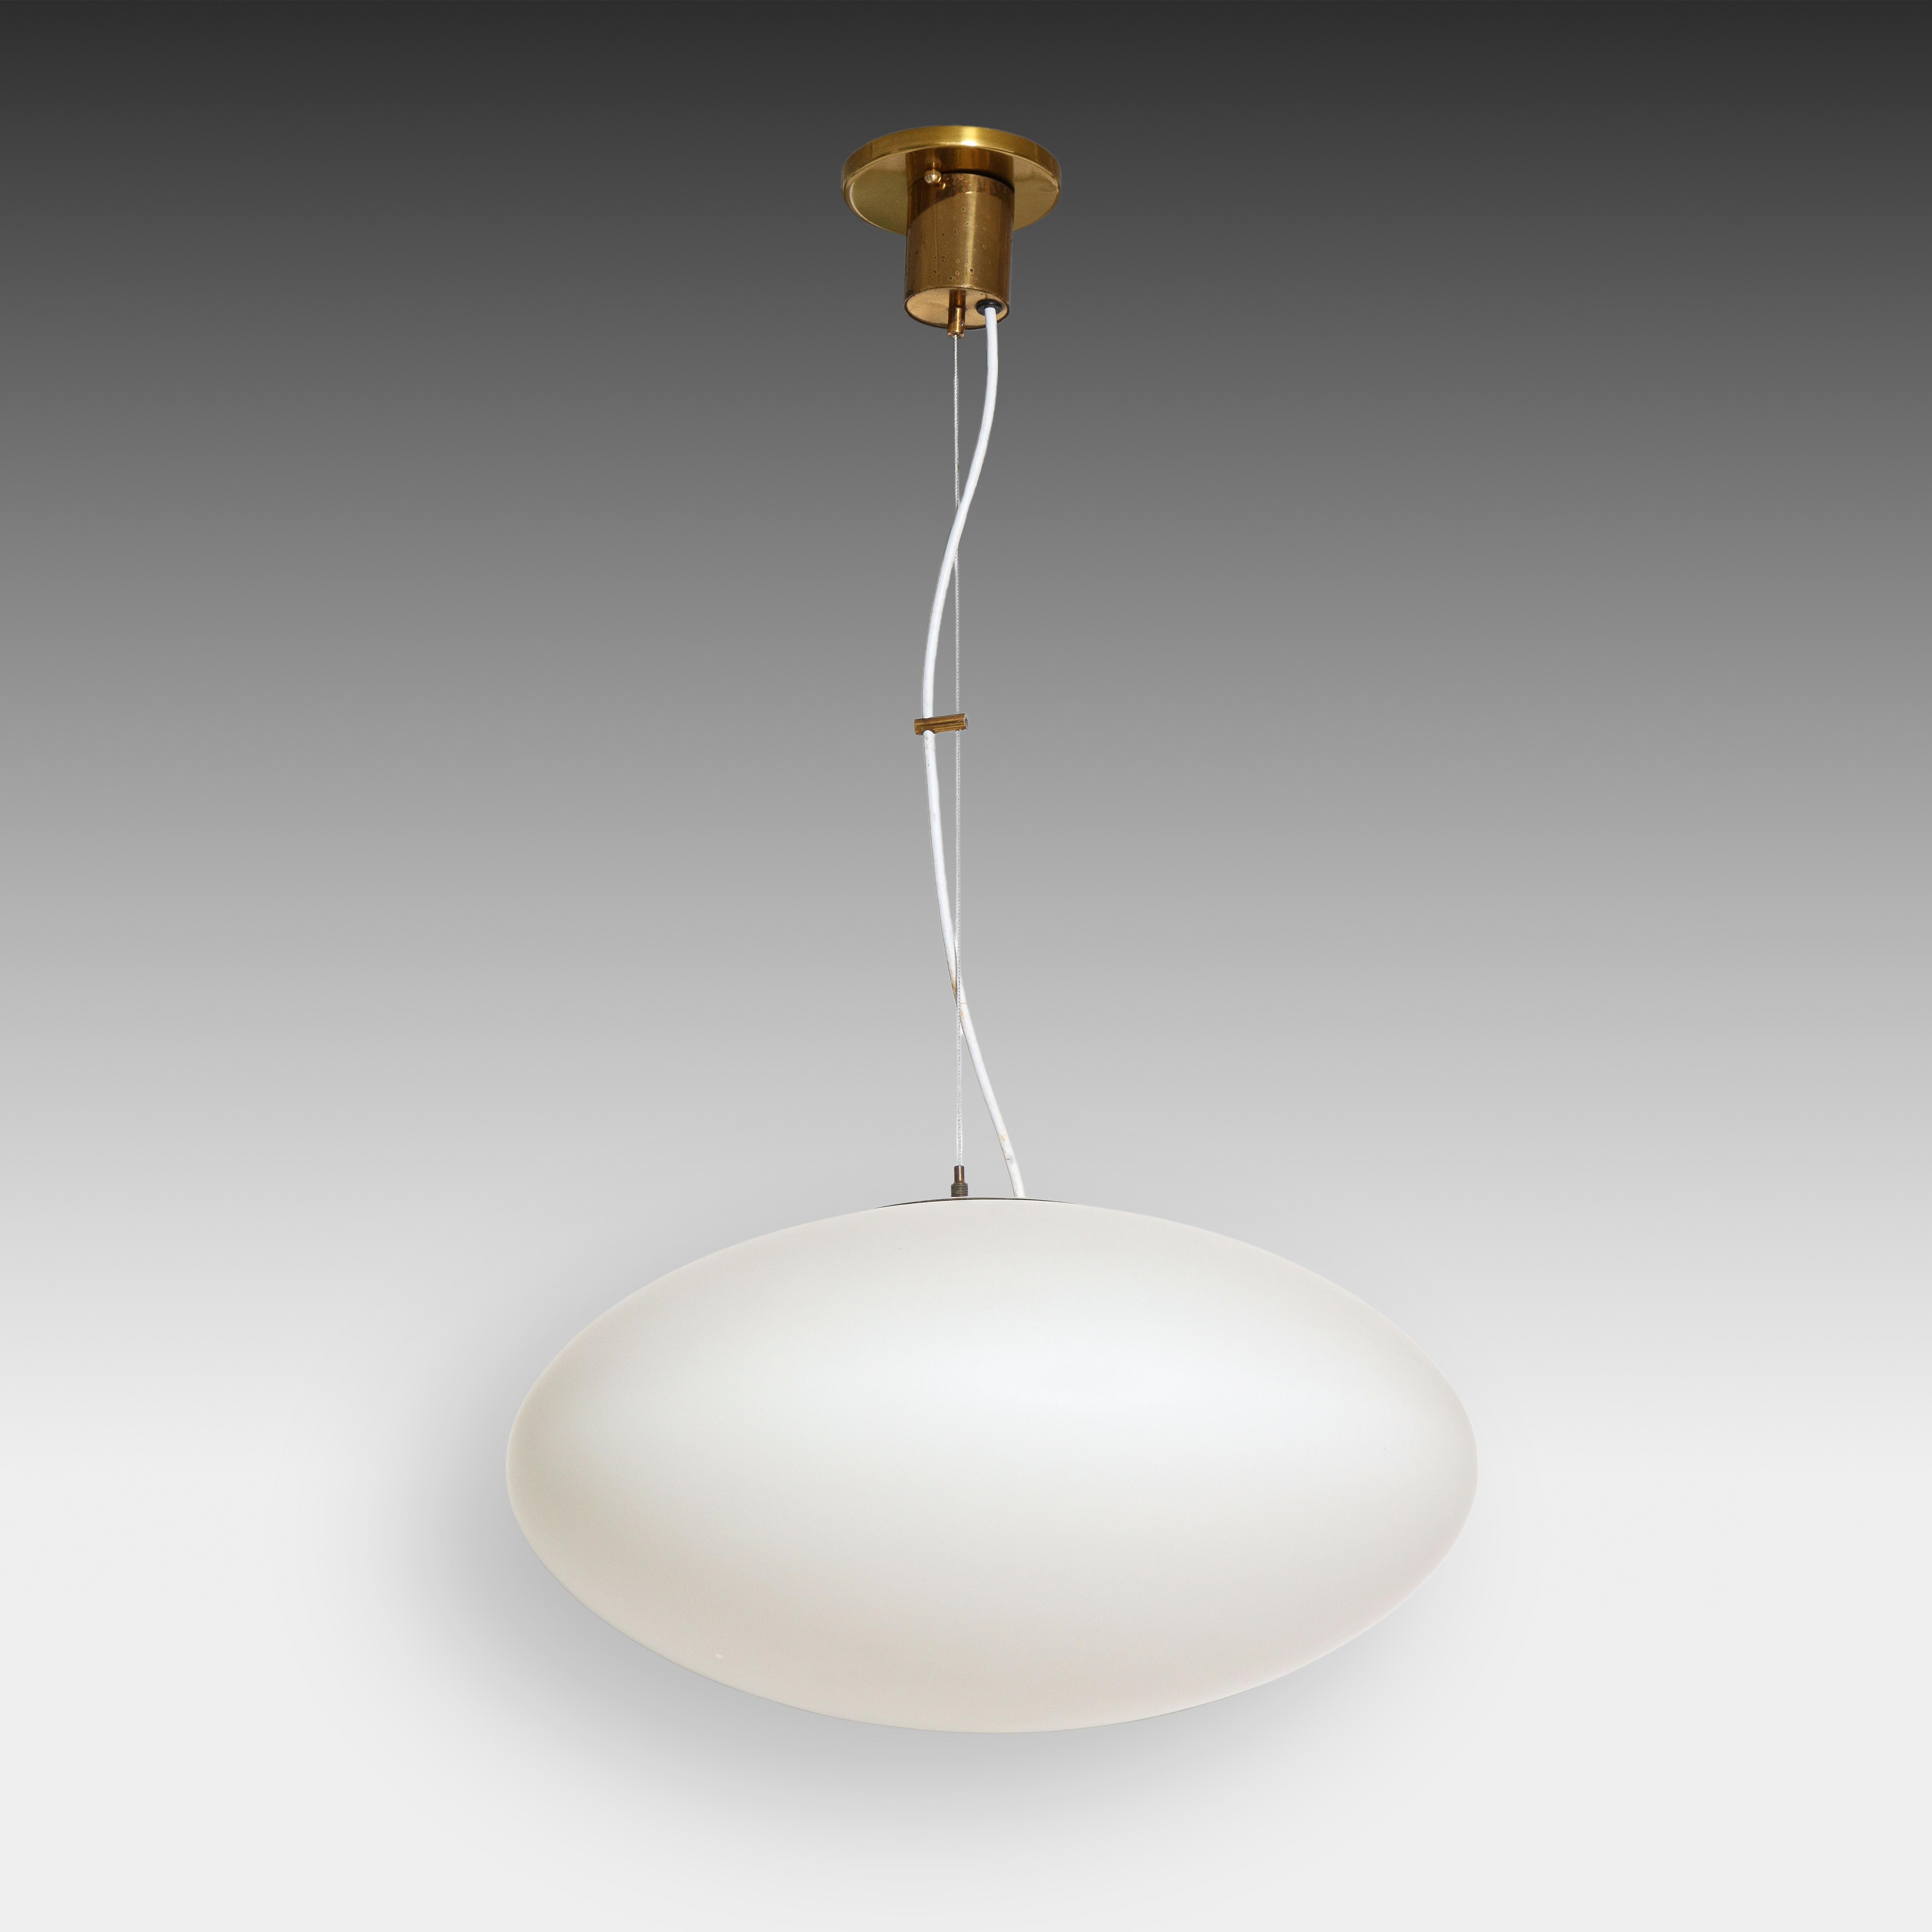 Stilnovo original pair of pendant or suspension lights model 1104 with opaque satin glass diffuser, enameled metal, original brass canopy with matching custom ceiling plate. The opaque glass diffuser is suspended by a wire so the overall height is